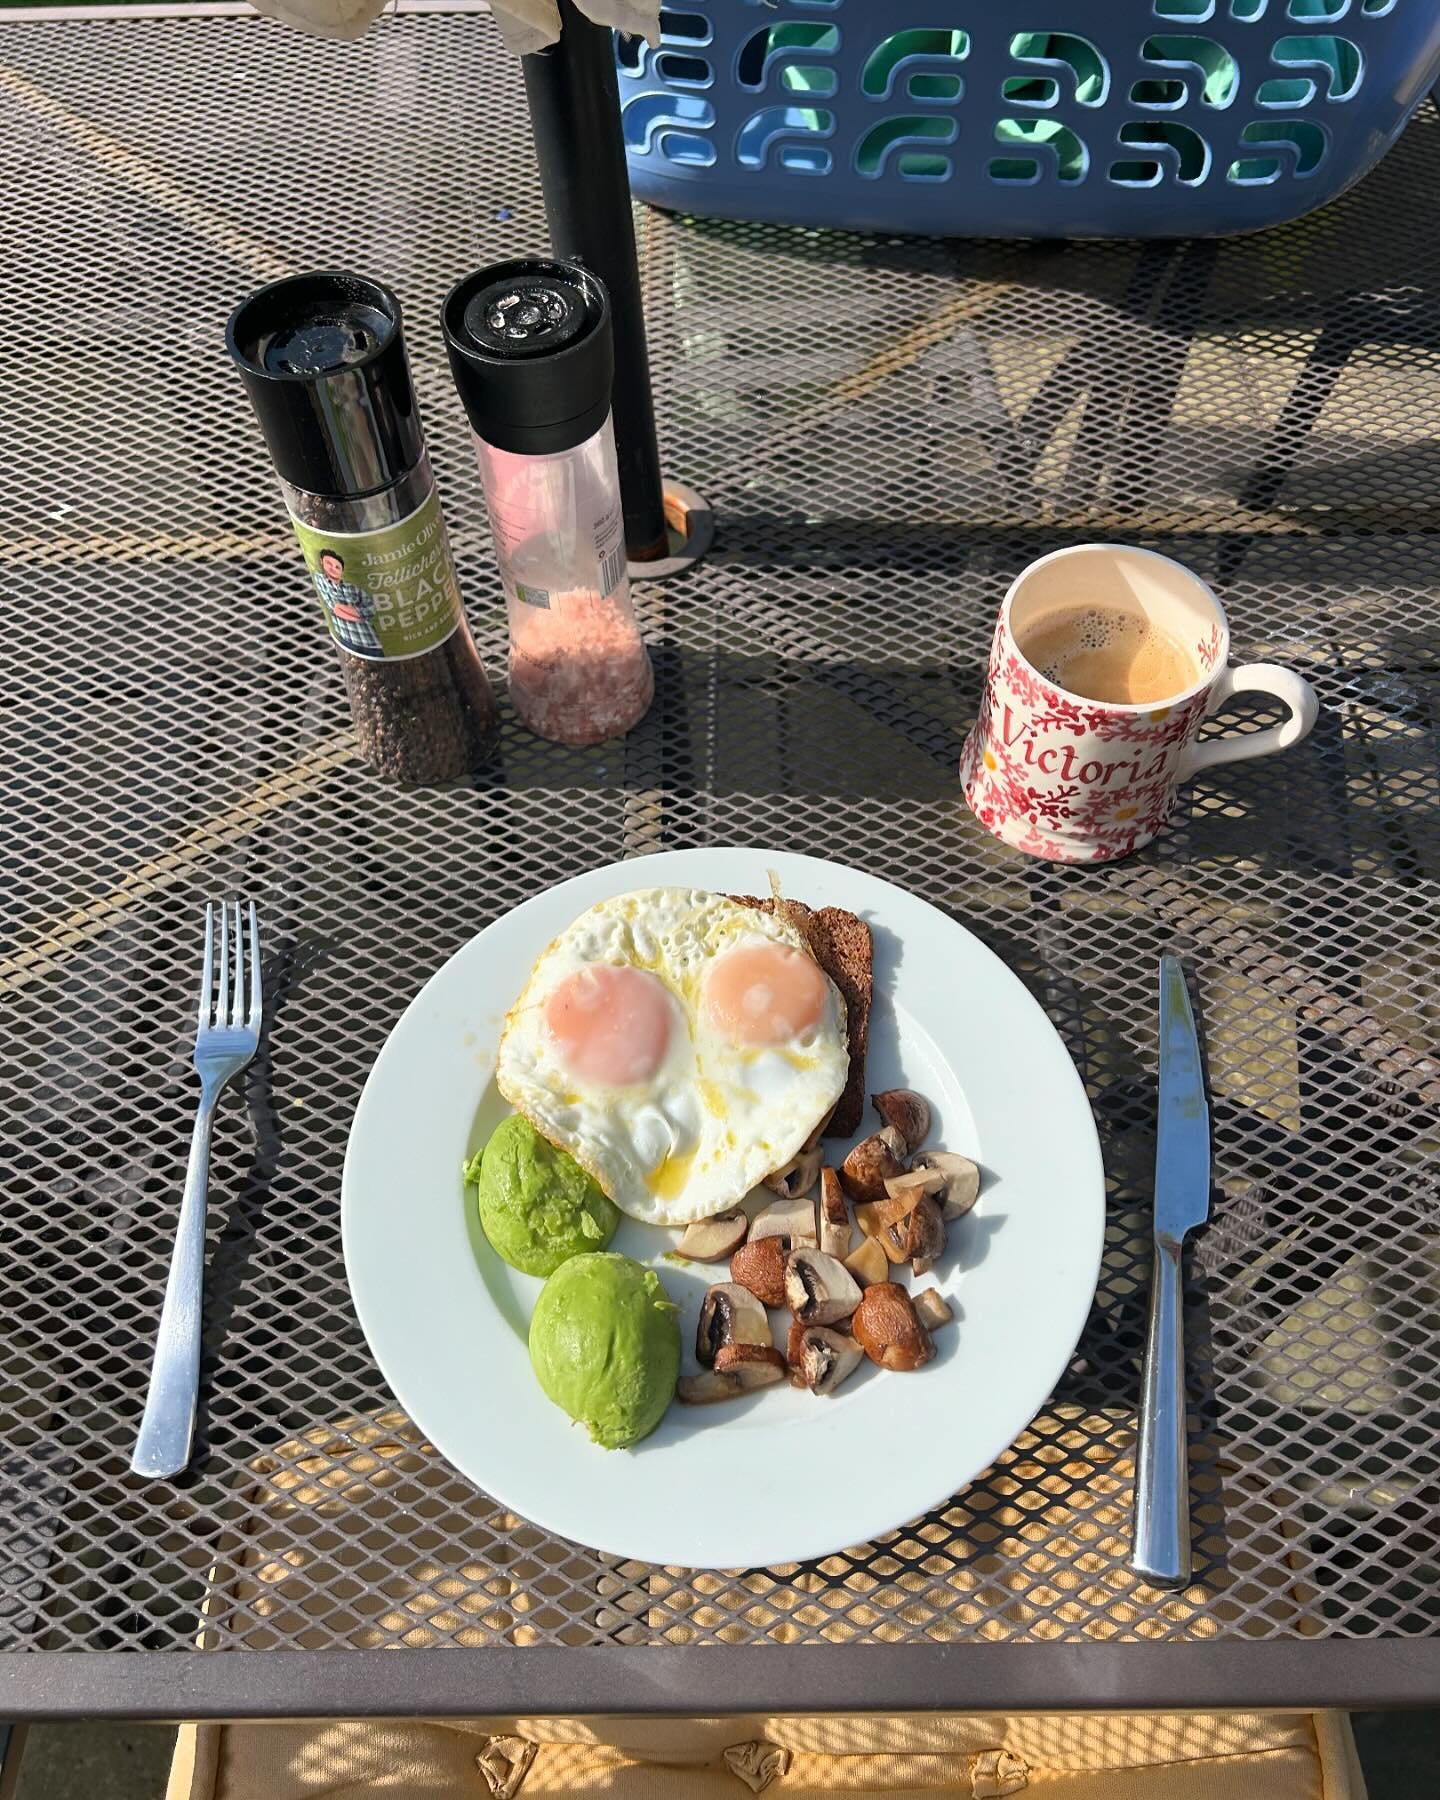 Breakfast in the sunshine post school walk drop off and pre dog walk. 

I&rsquo;ve been walking a lot this week and have been more active. Listening to my body wisdom re what it needs🙌🏻🙏🏻🫁❤️

I&rsquo;m loving the sunshine too!!!

Happy Thursday.